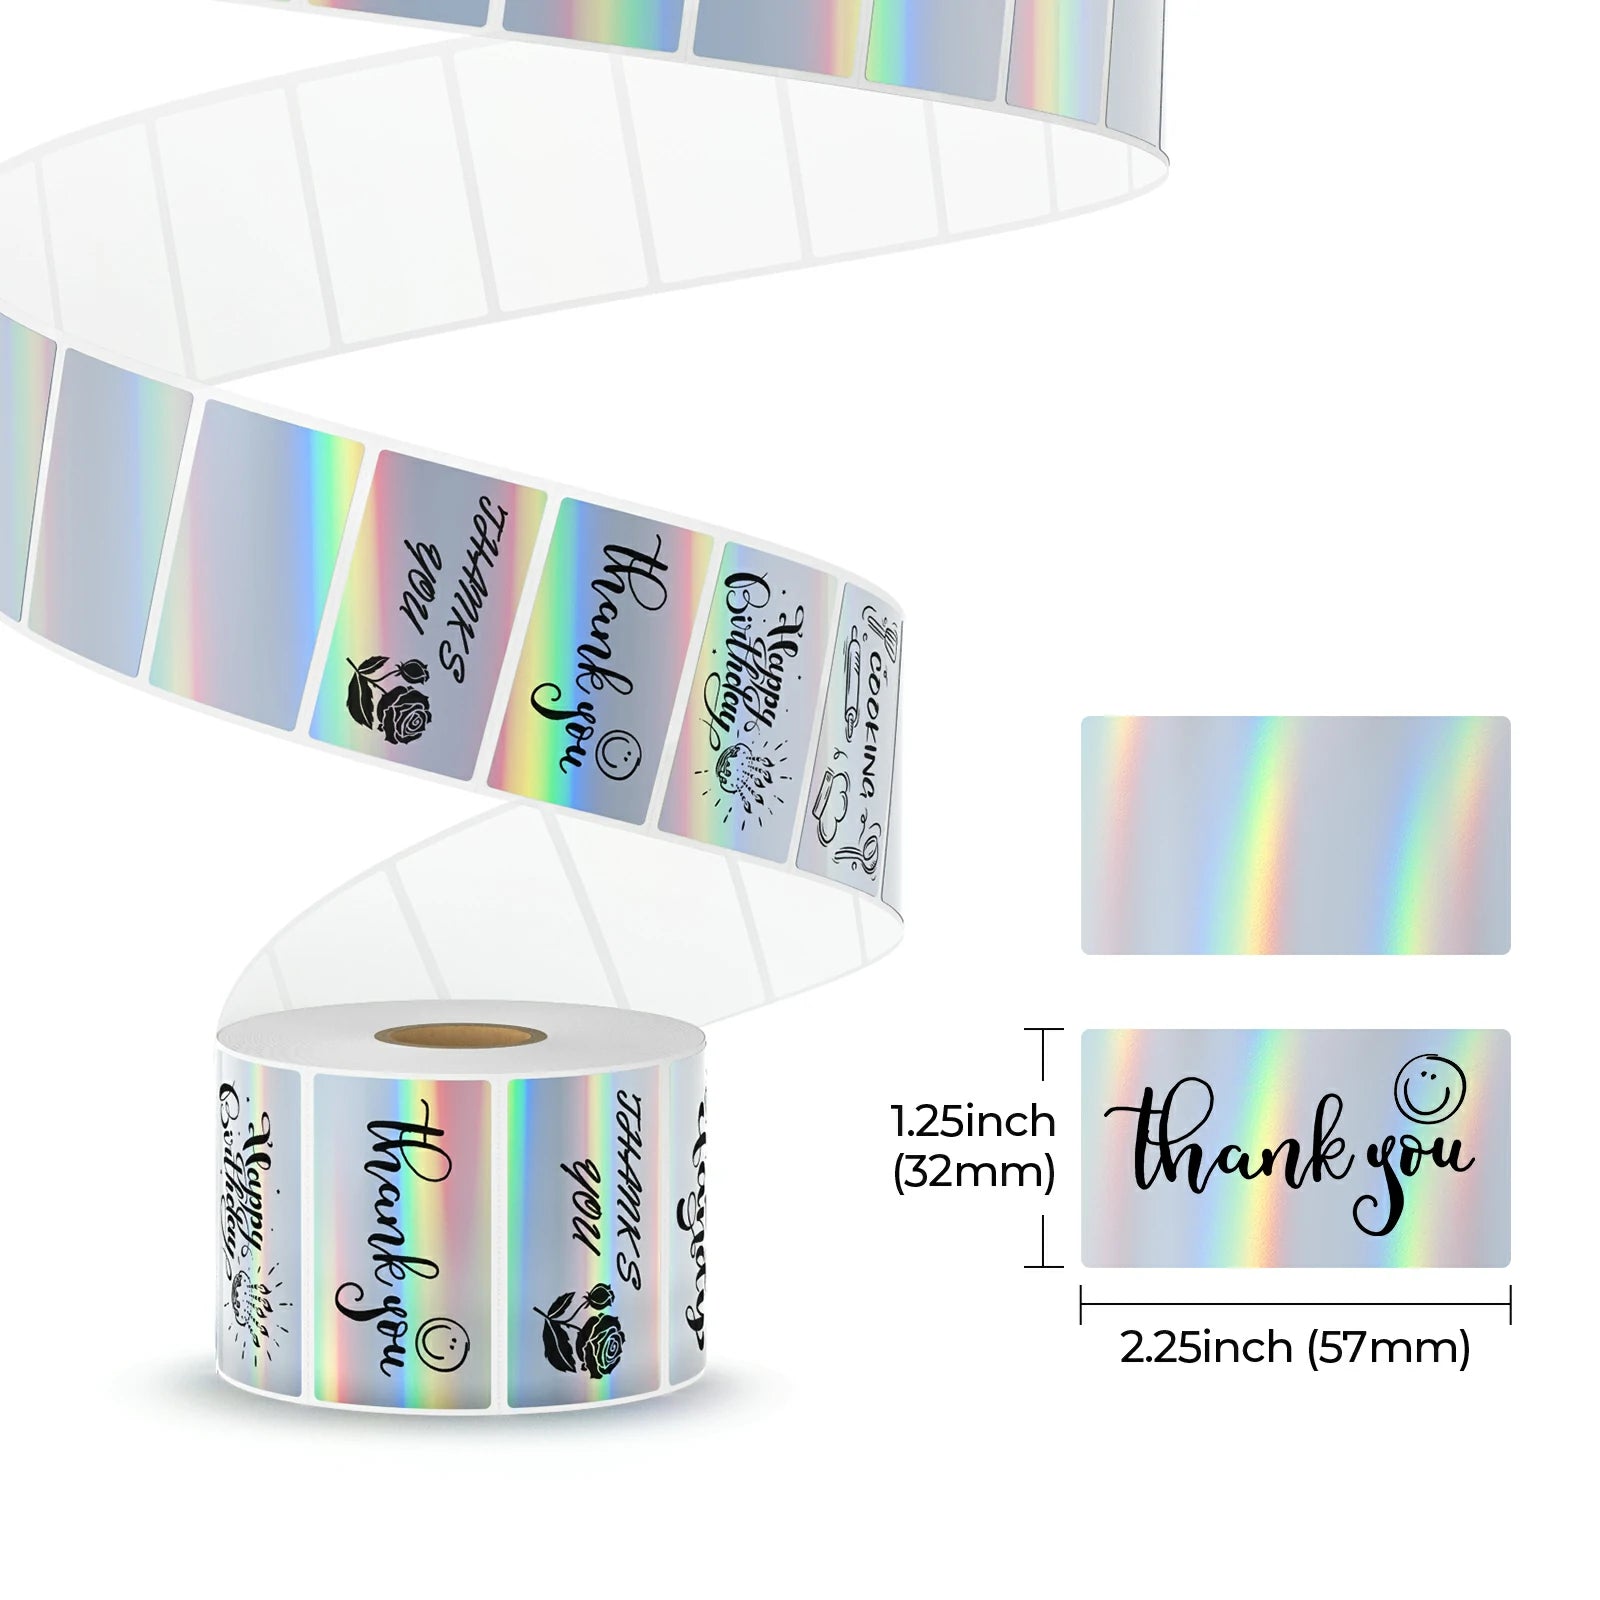 MUNBYN Holographic Silver Thermal Sticker Labels